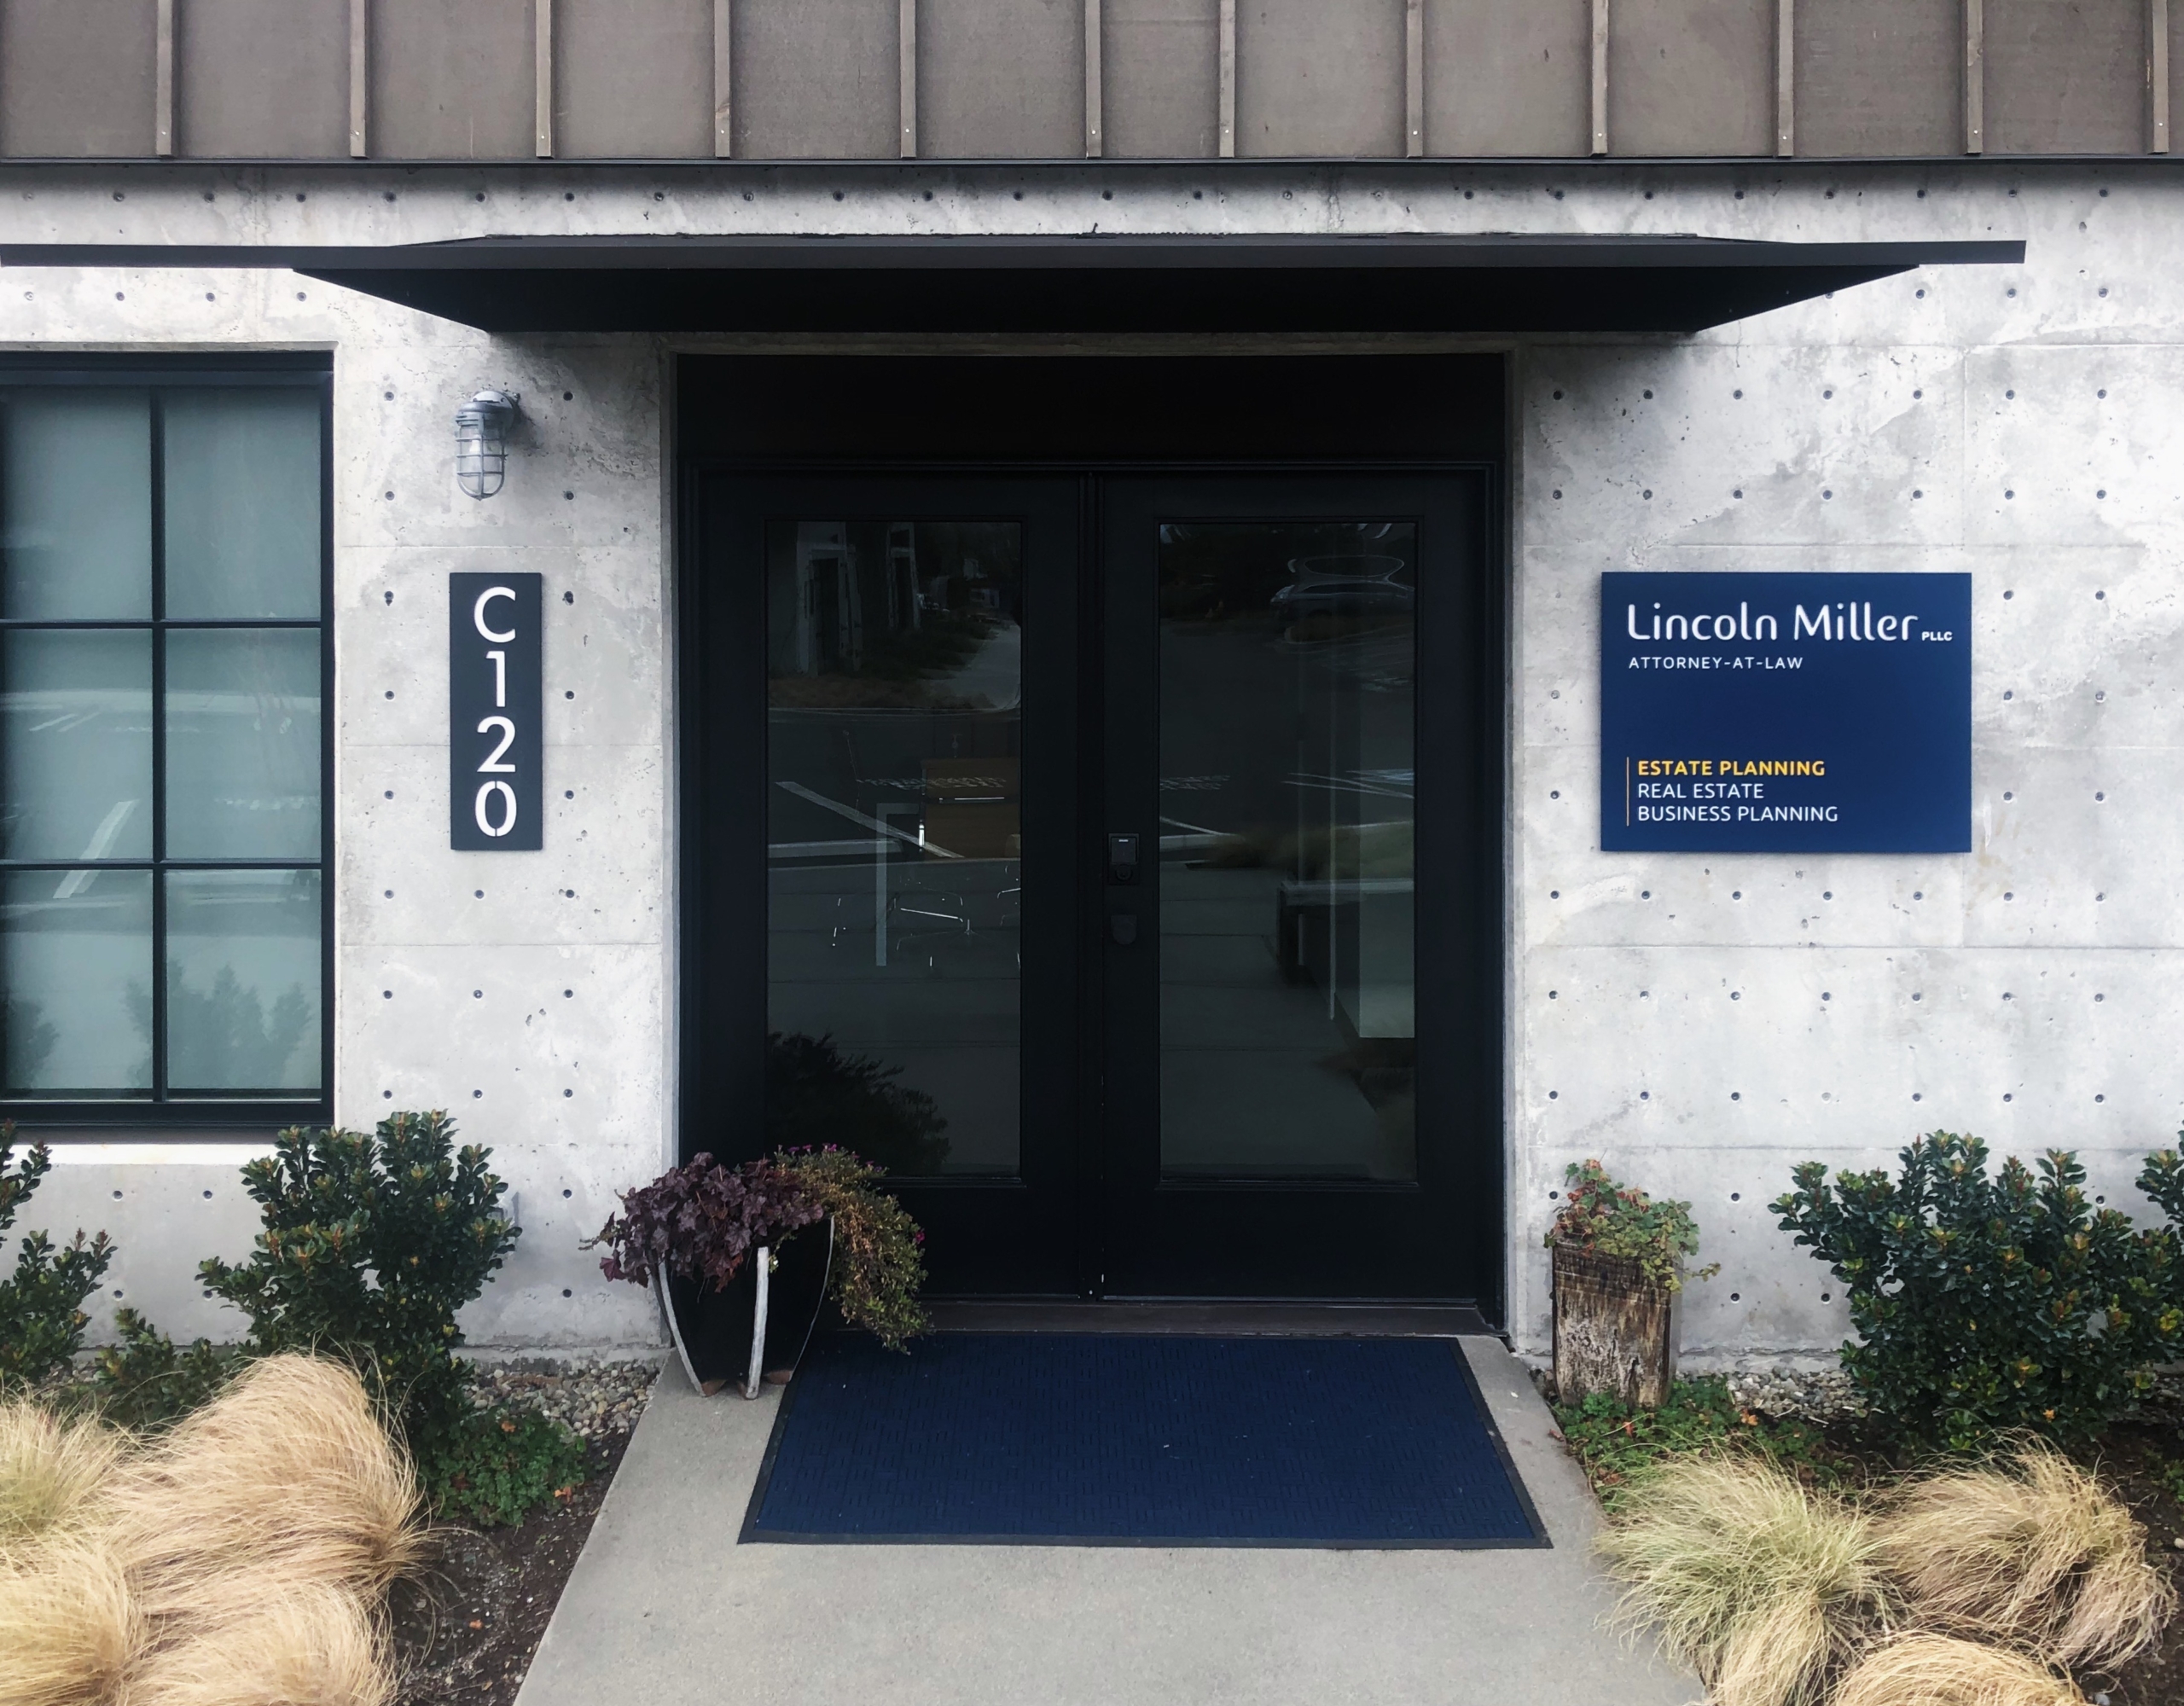 Lincoln Miller Outdoor Signage